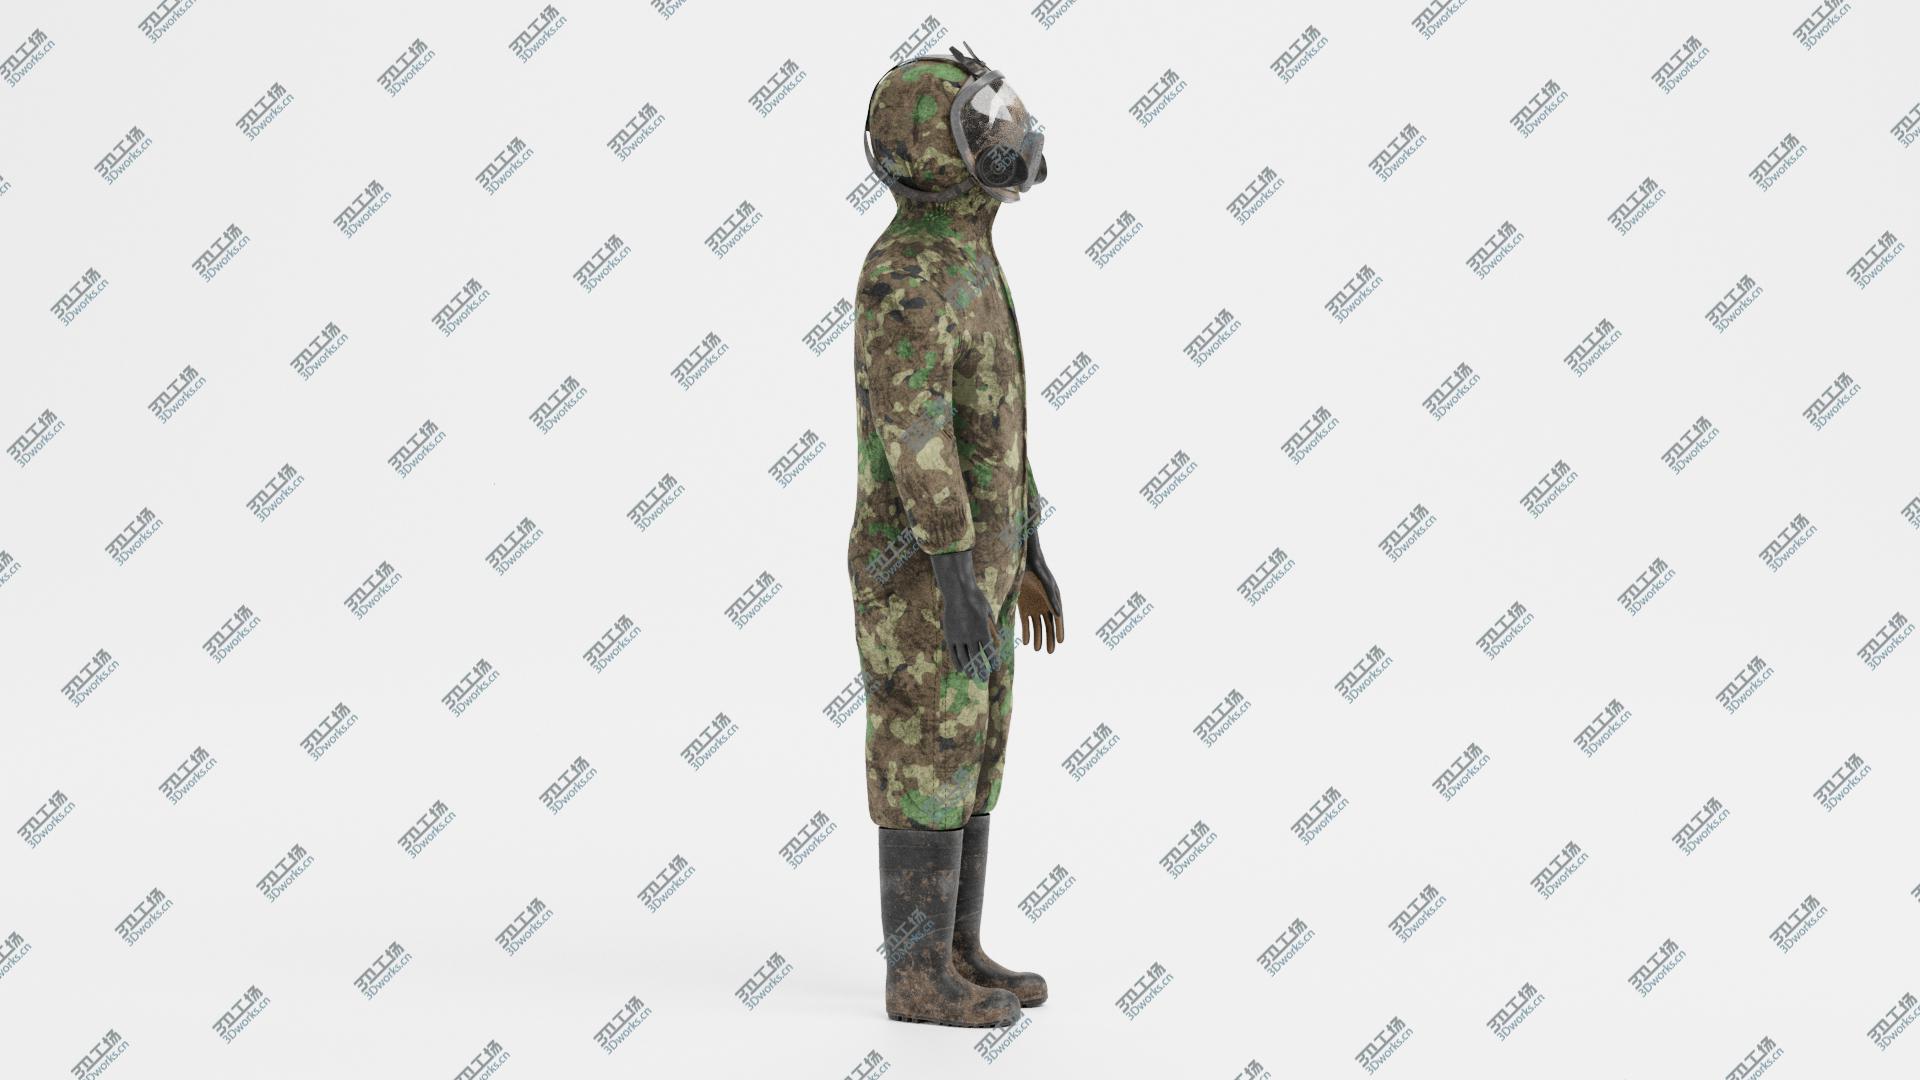 images/goods_img/202104093/Protective Suit 4 3D model/3.jpg